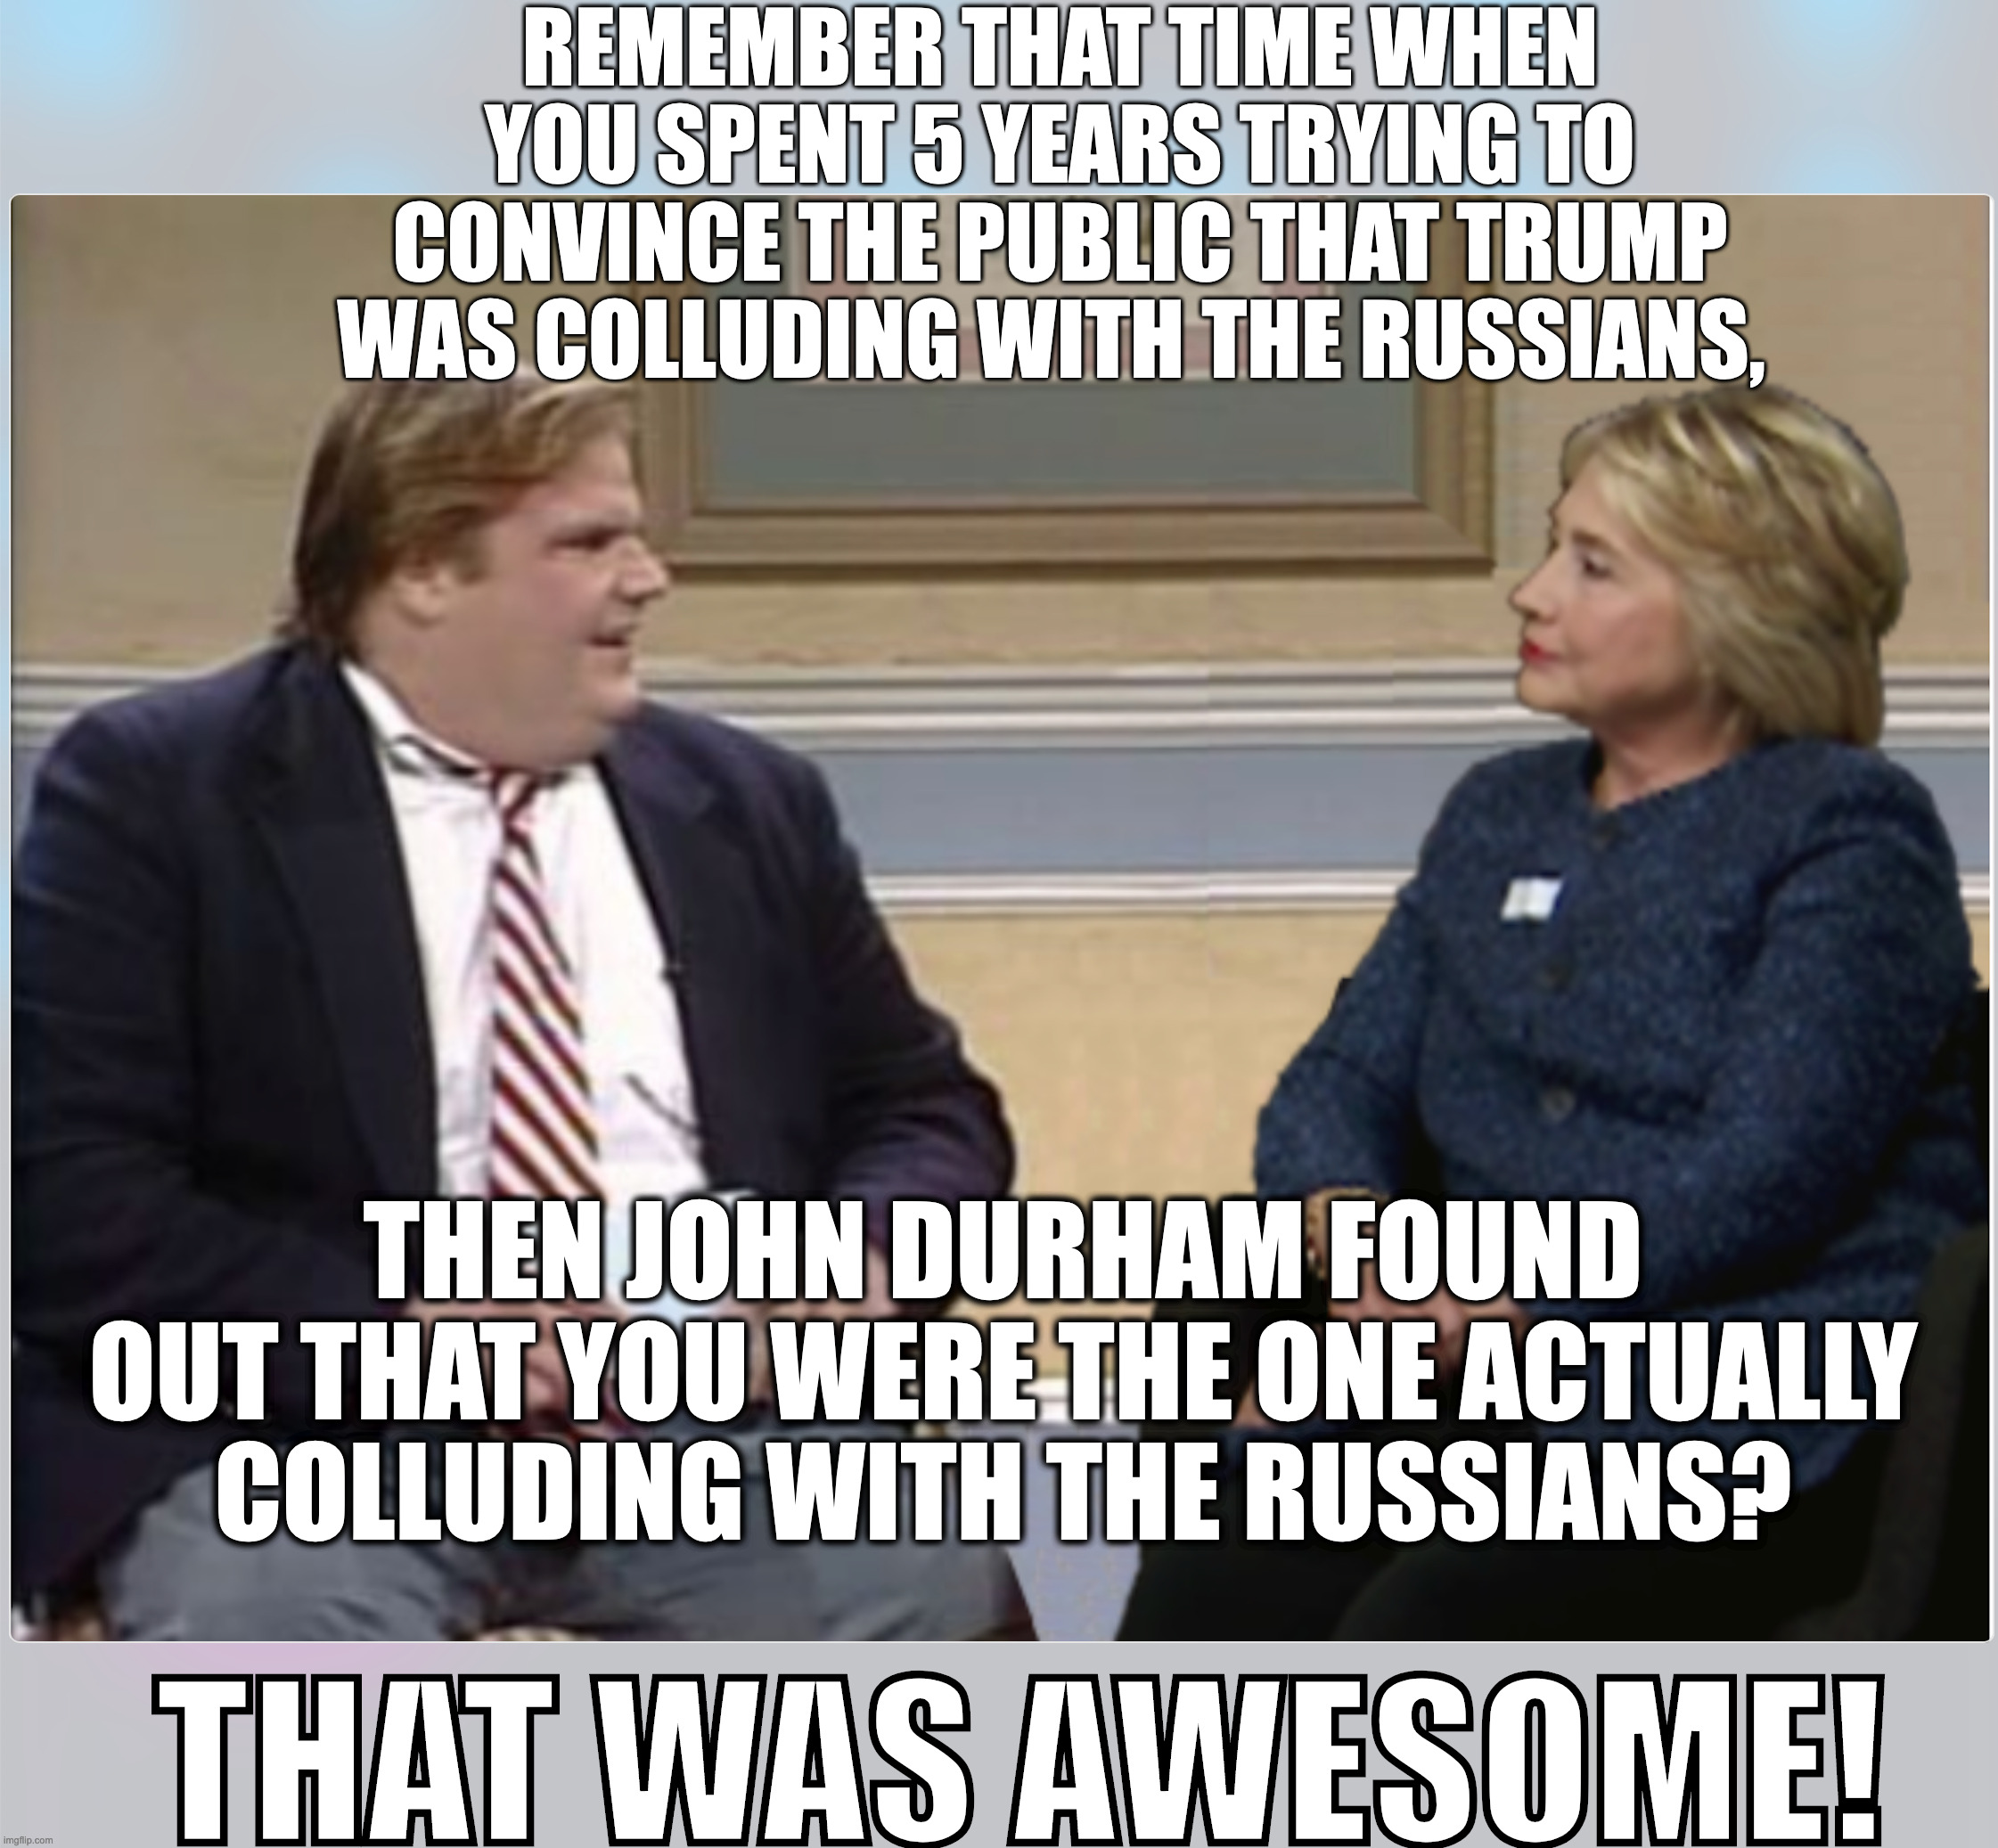 REMEMBER THAT TIME WHEN YOU SPENT 5 YEARS TRYING TO CONVINCE THE PUBLIC THAT TRUMP WAS COLLUDING WITH THE RUSSIANS, THEN JOHN DURHAM FOUND OUT THAT YOU WERE THE ONE ACTUALLY COLLUDING WITH THE RUSSIANS? THAT WAS AWESOME! | image tagged in hillary clinton | made w/ Imgflip meme maker